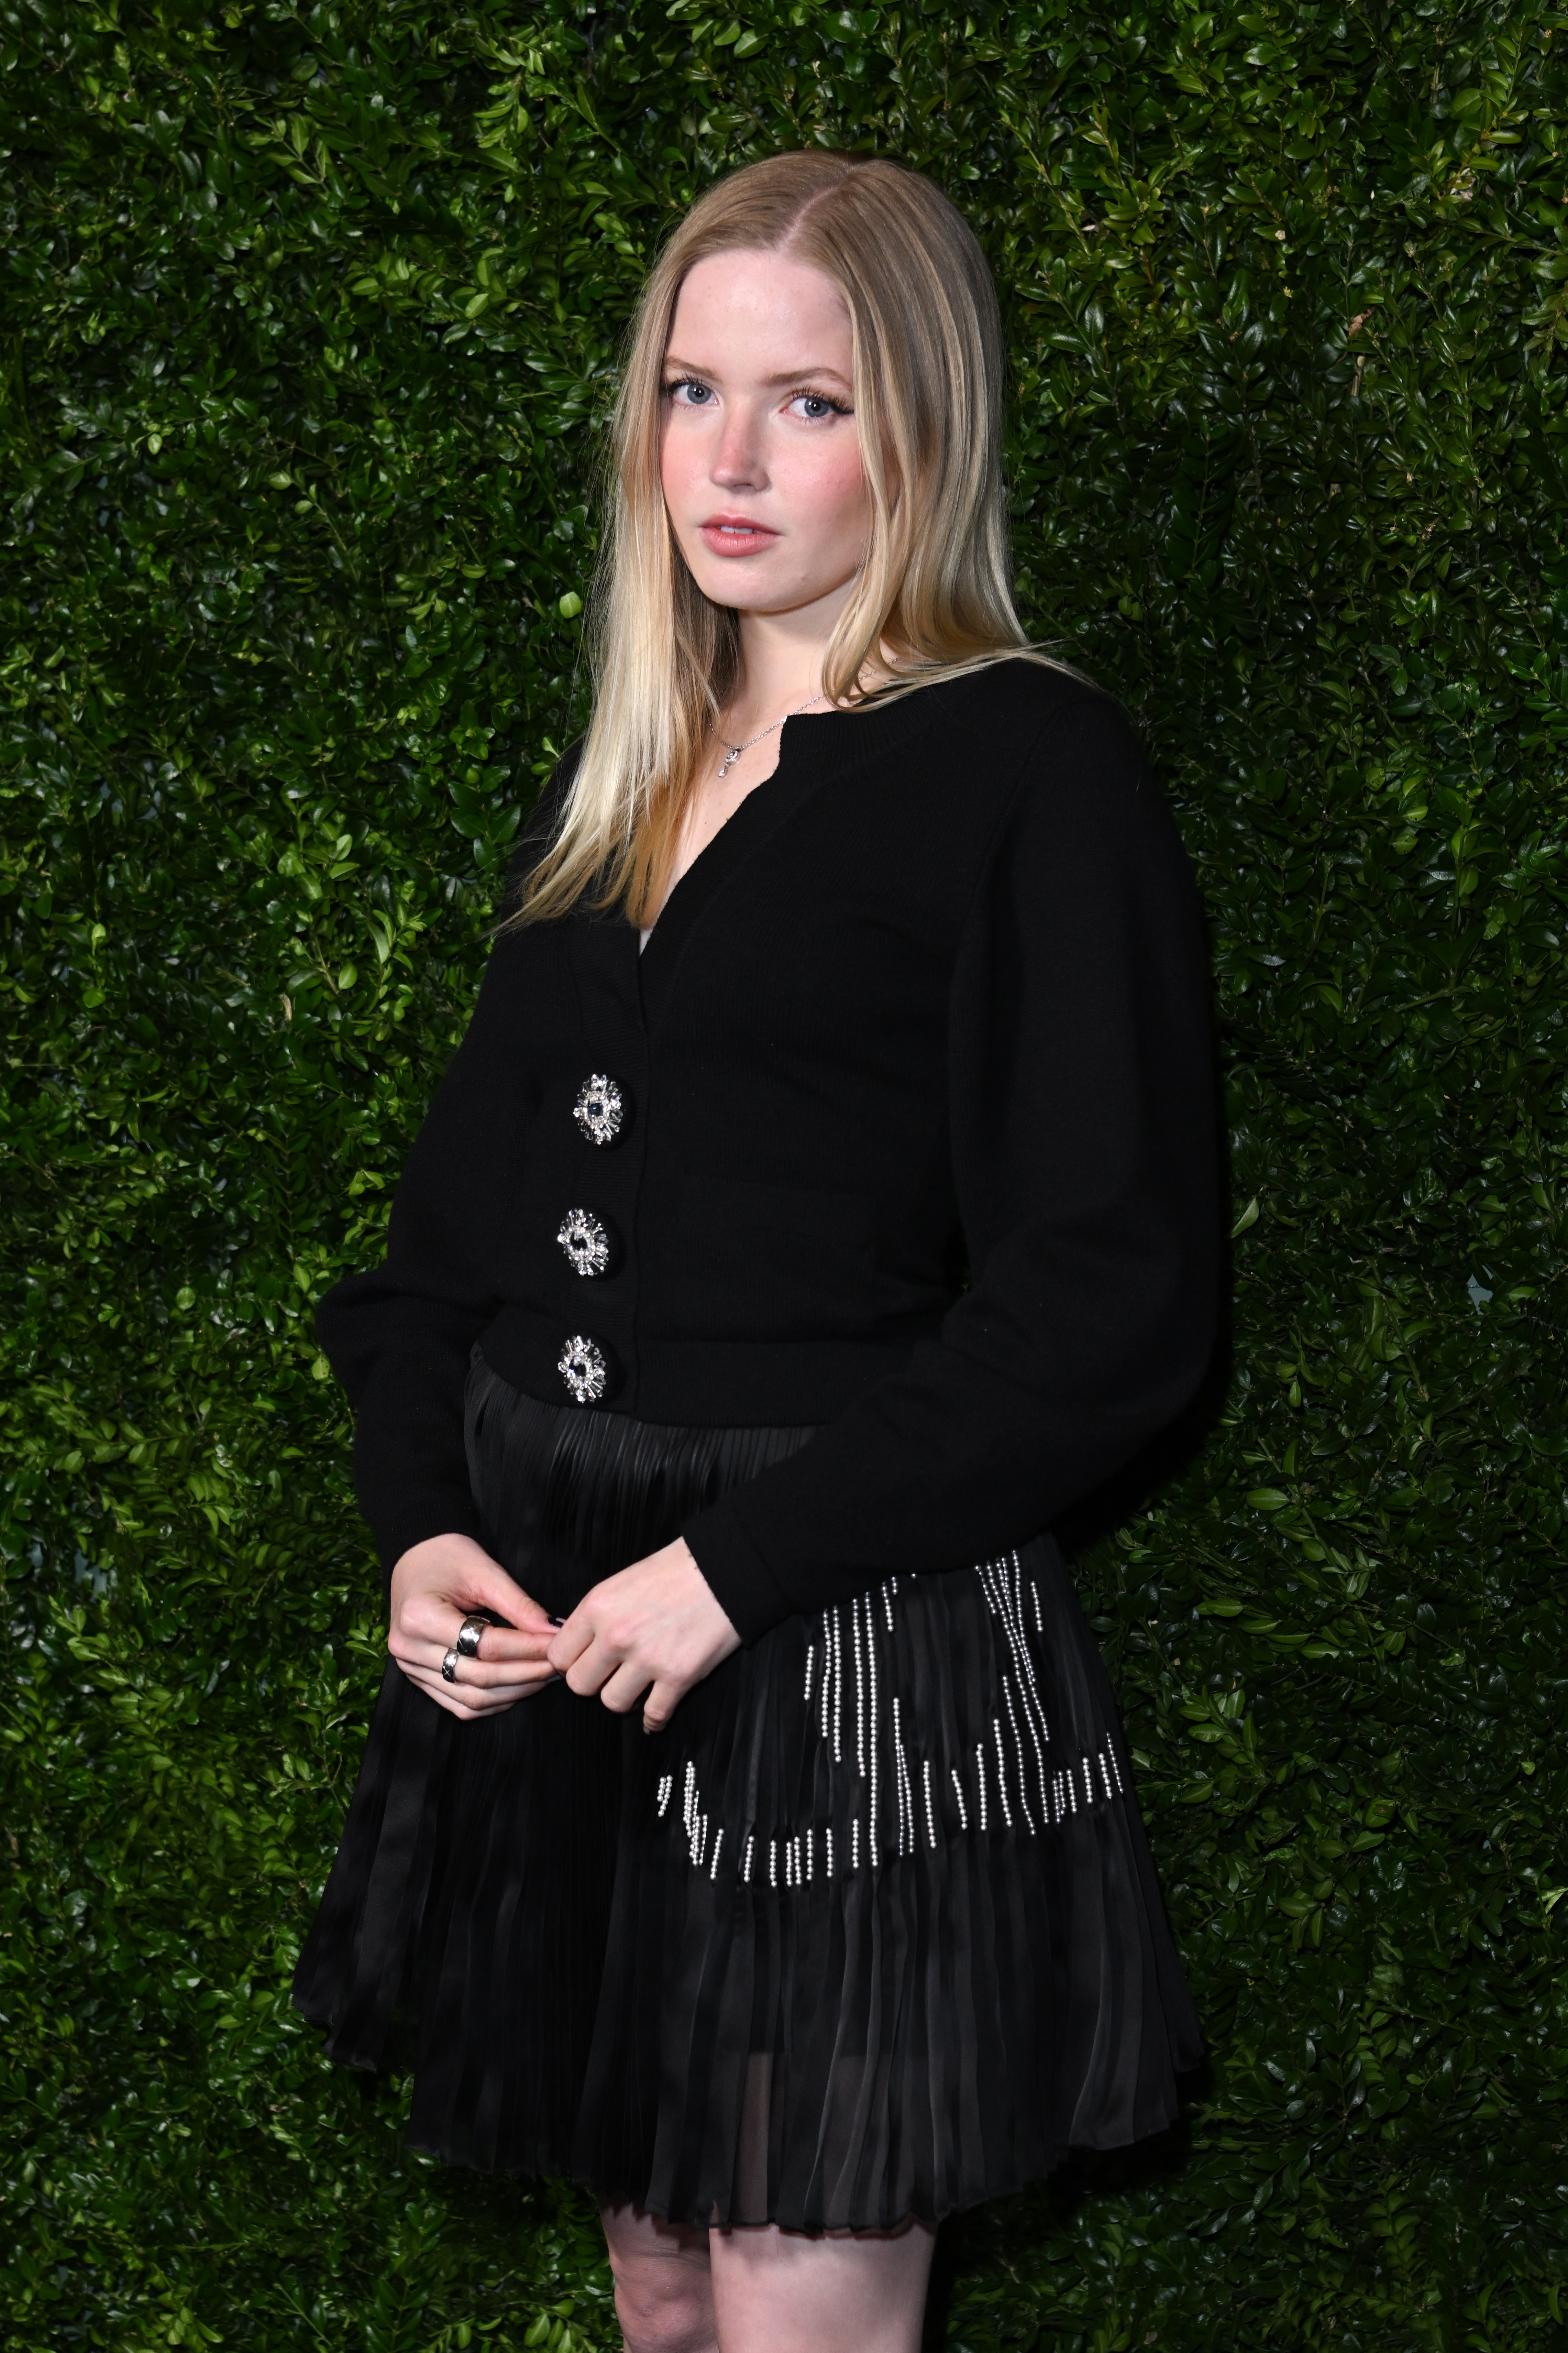 Charles Finch x CHANEL - The Night Before BAFTA Dinner - Arrivals